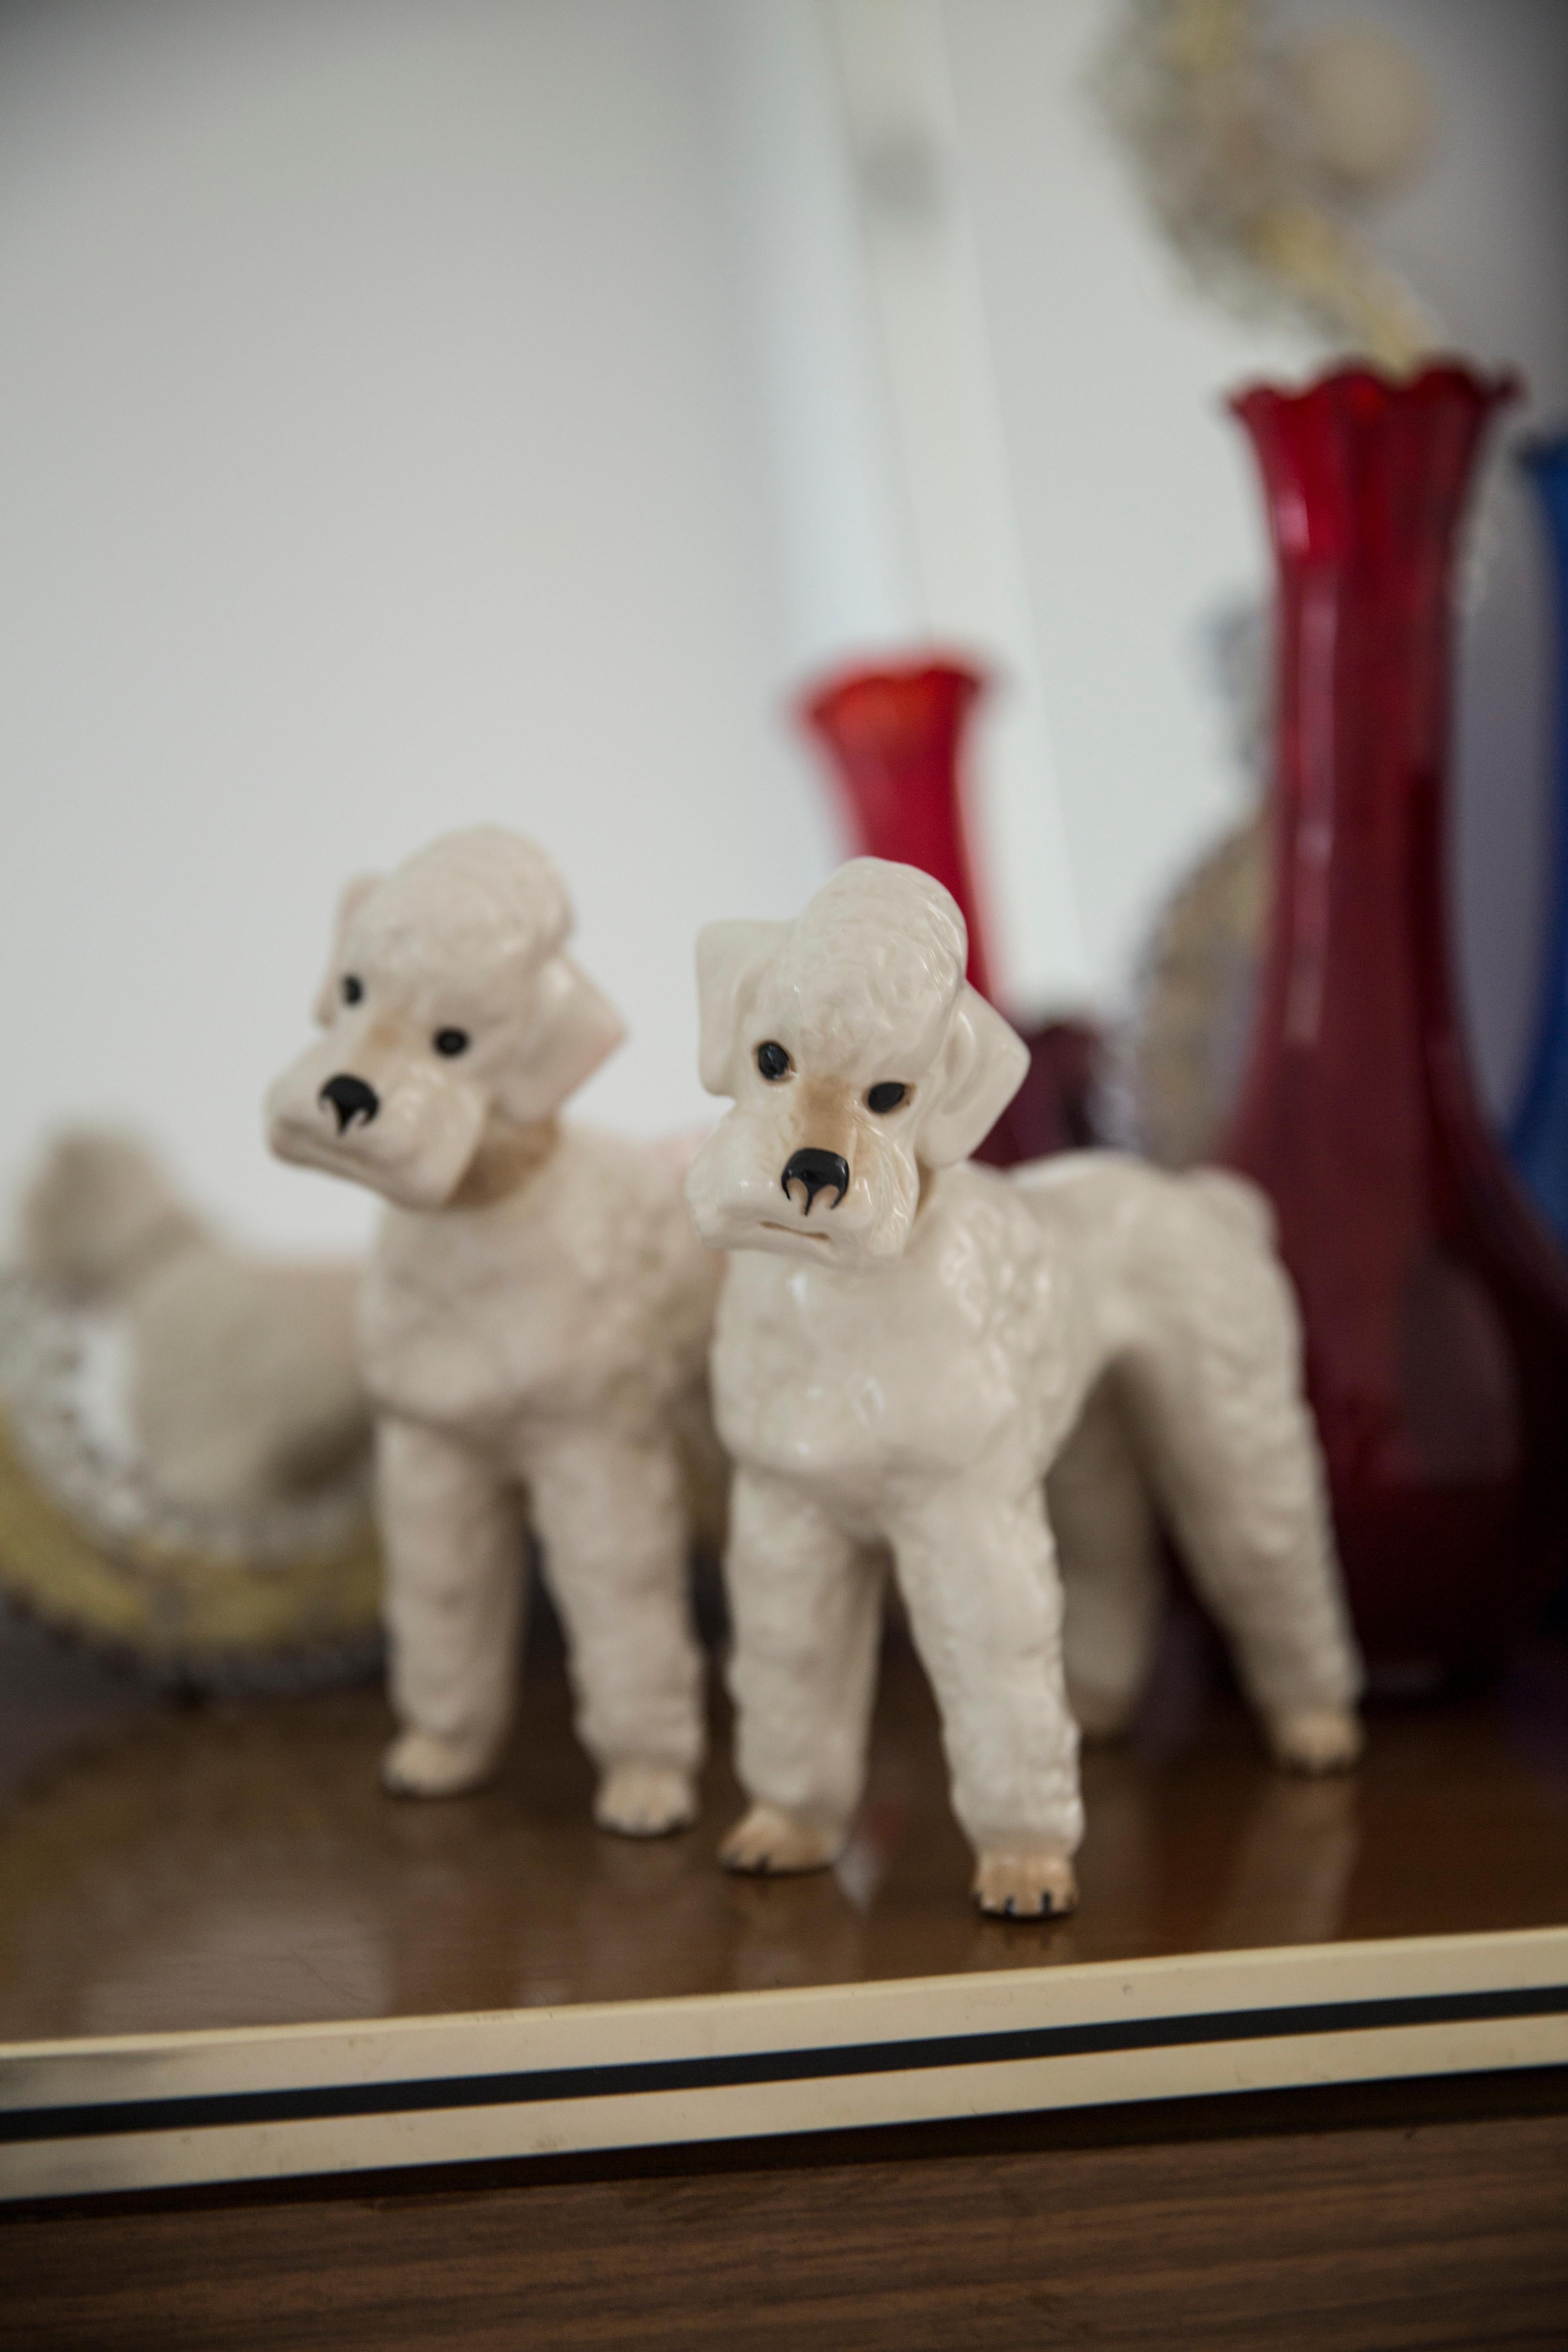 Painted ceramic, good original vintage condition. 
Damaged leg - was repaired - shown on pictures. 
Beautiful and unique decorative sculpture. 
White Poodle Dog Sculpture was produced in Italy. Only one dog available.